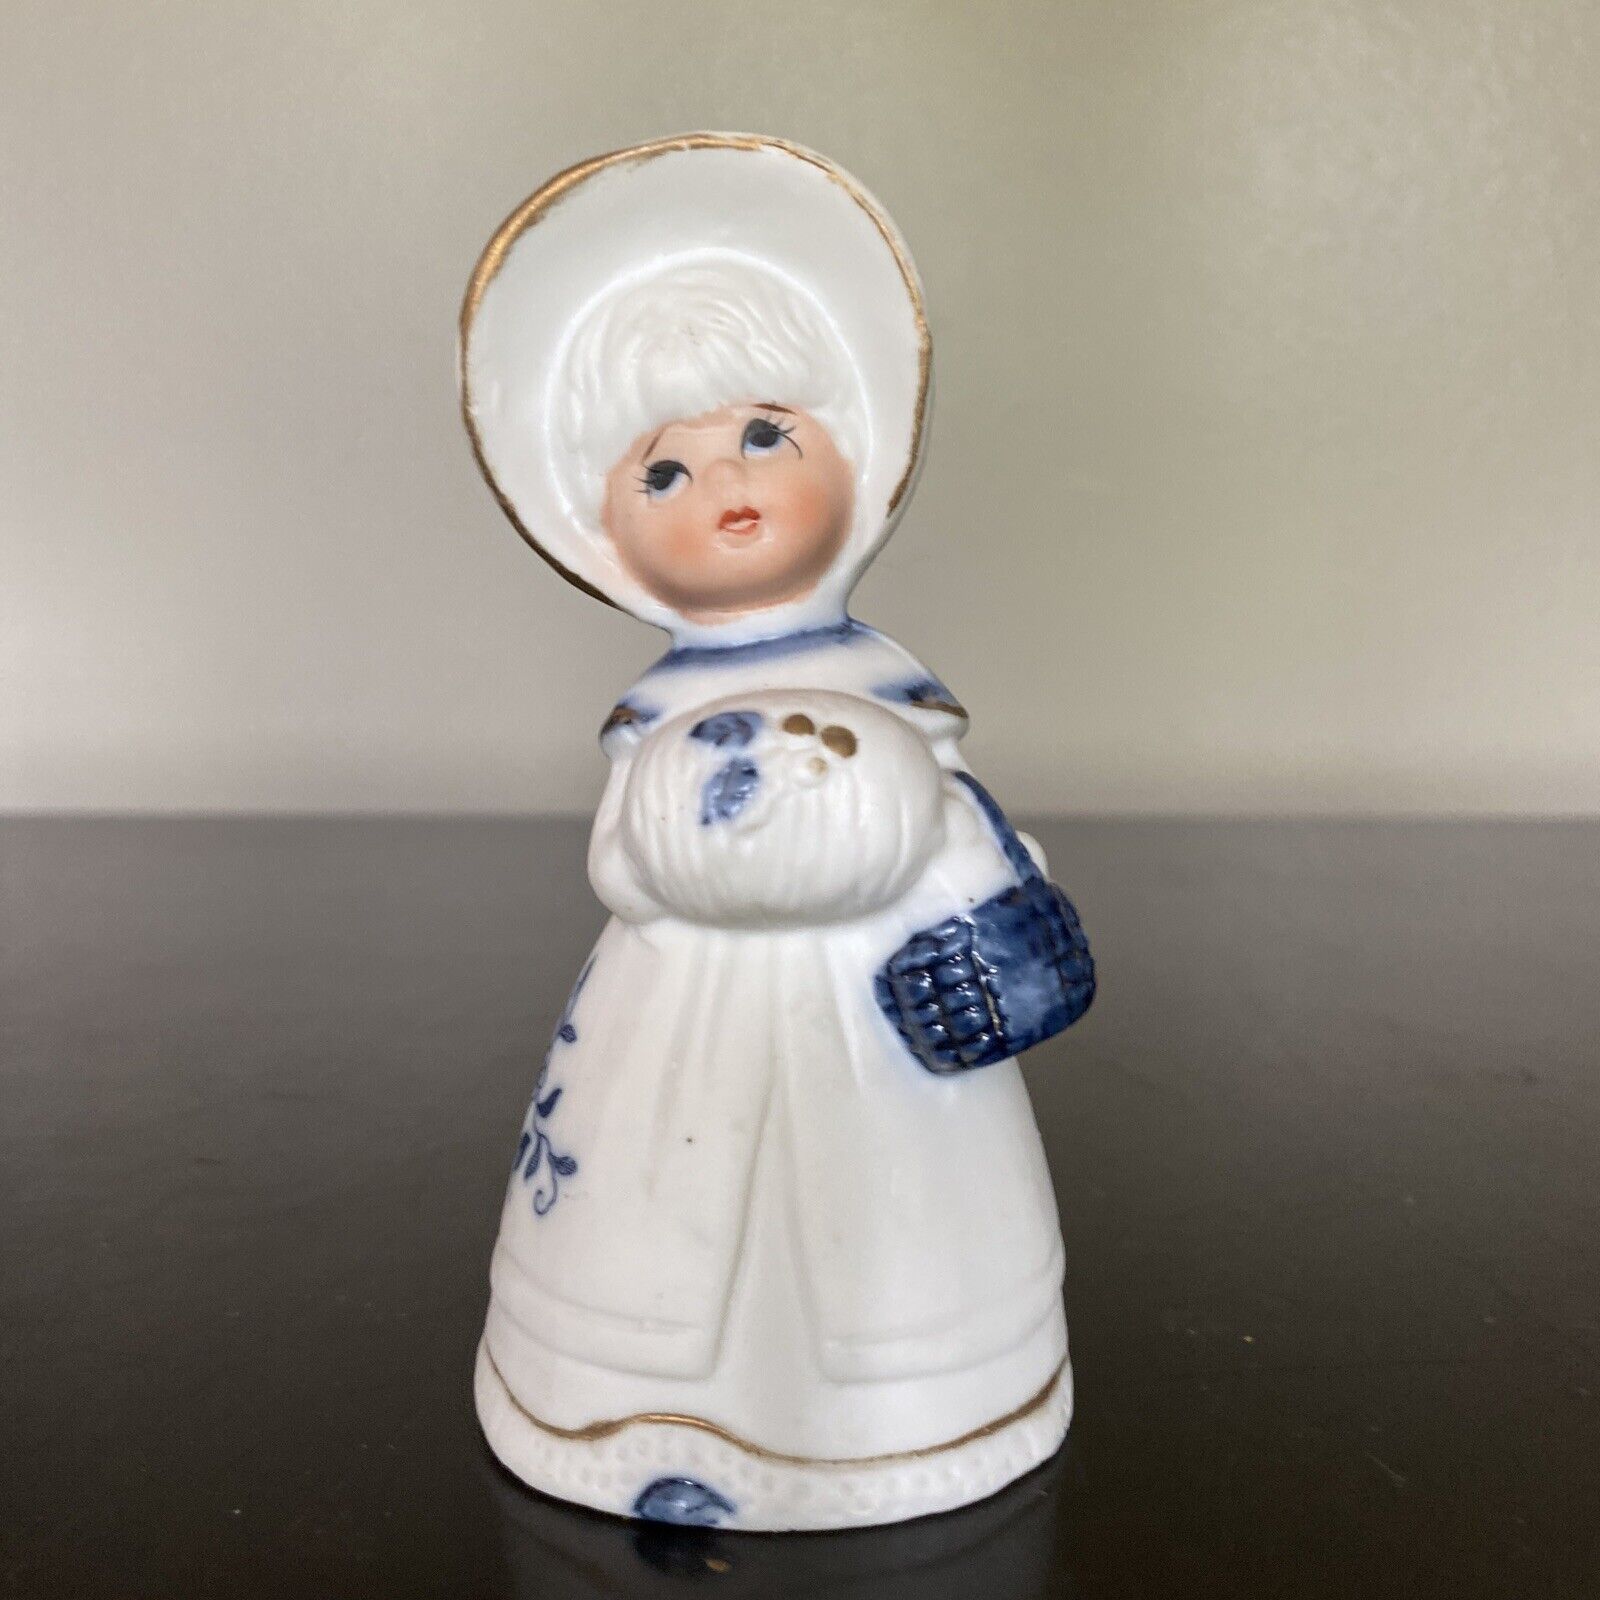 VINTAGE ROYAL MAJESTIC BELL PORCELAIN FIGURINE BY JASCO girl with Mitten